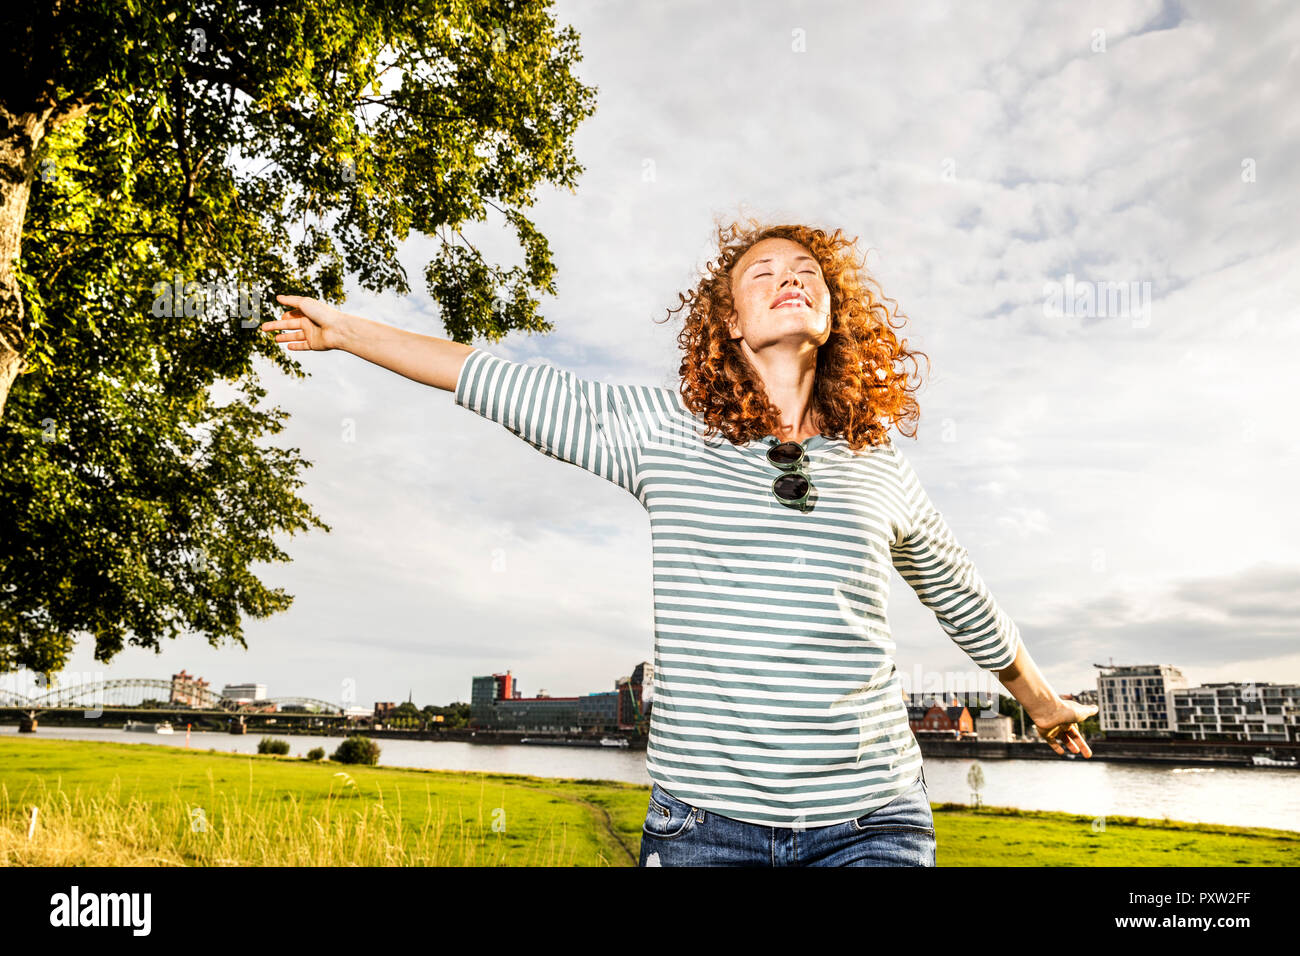 Germany, Cologne, young woman enjoying sunlight Stock Photo